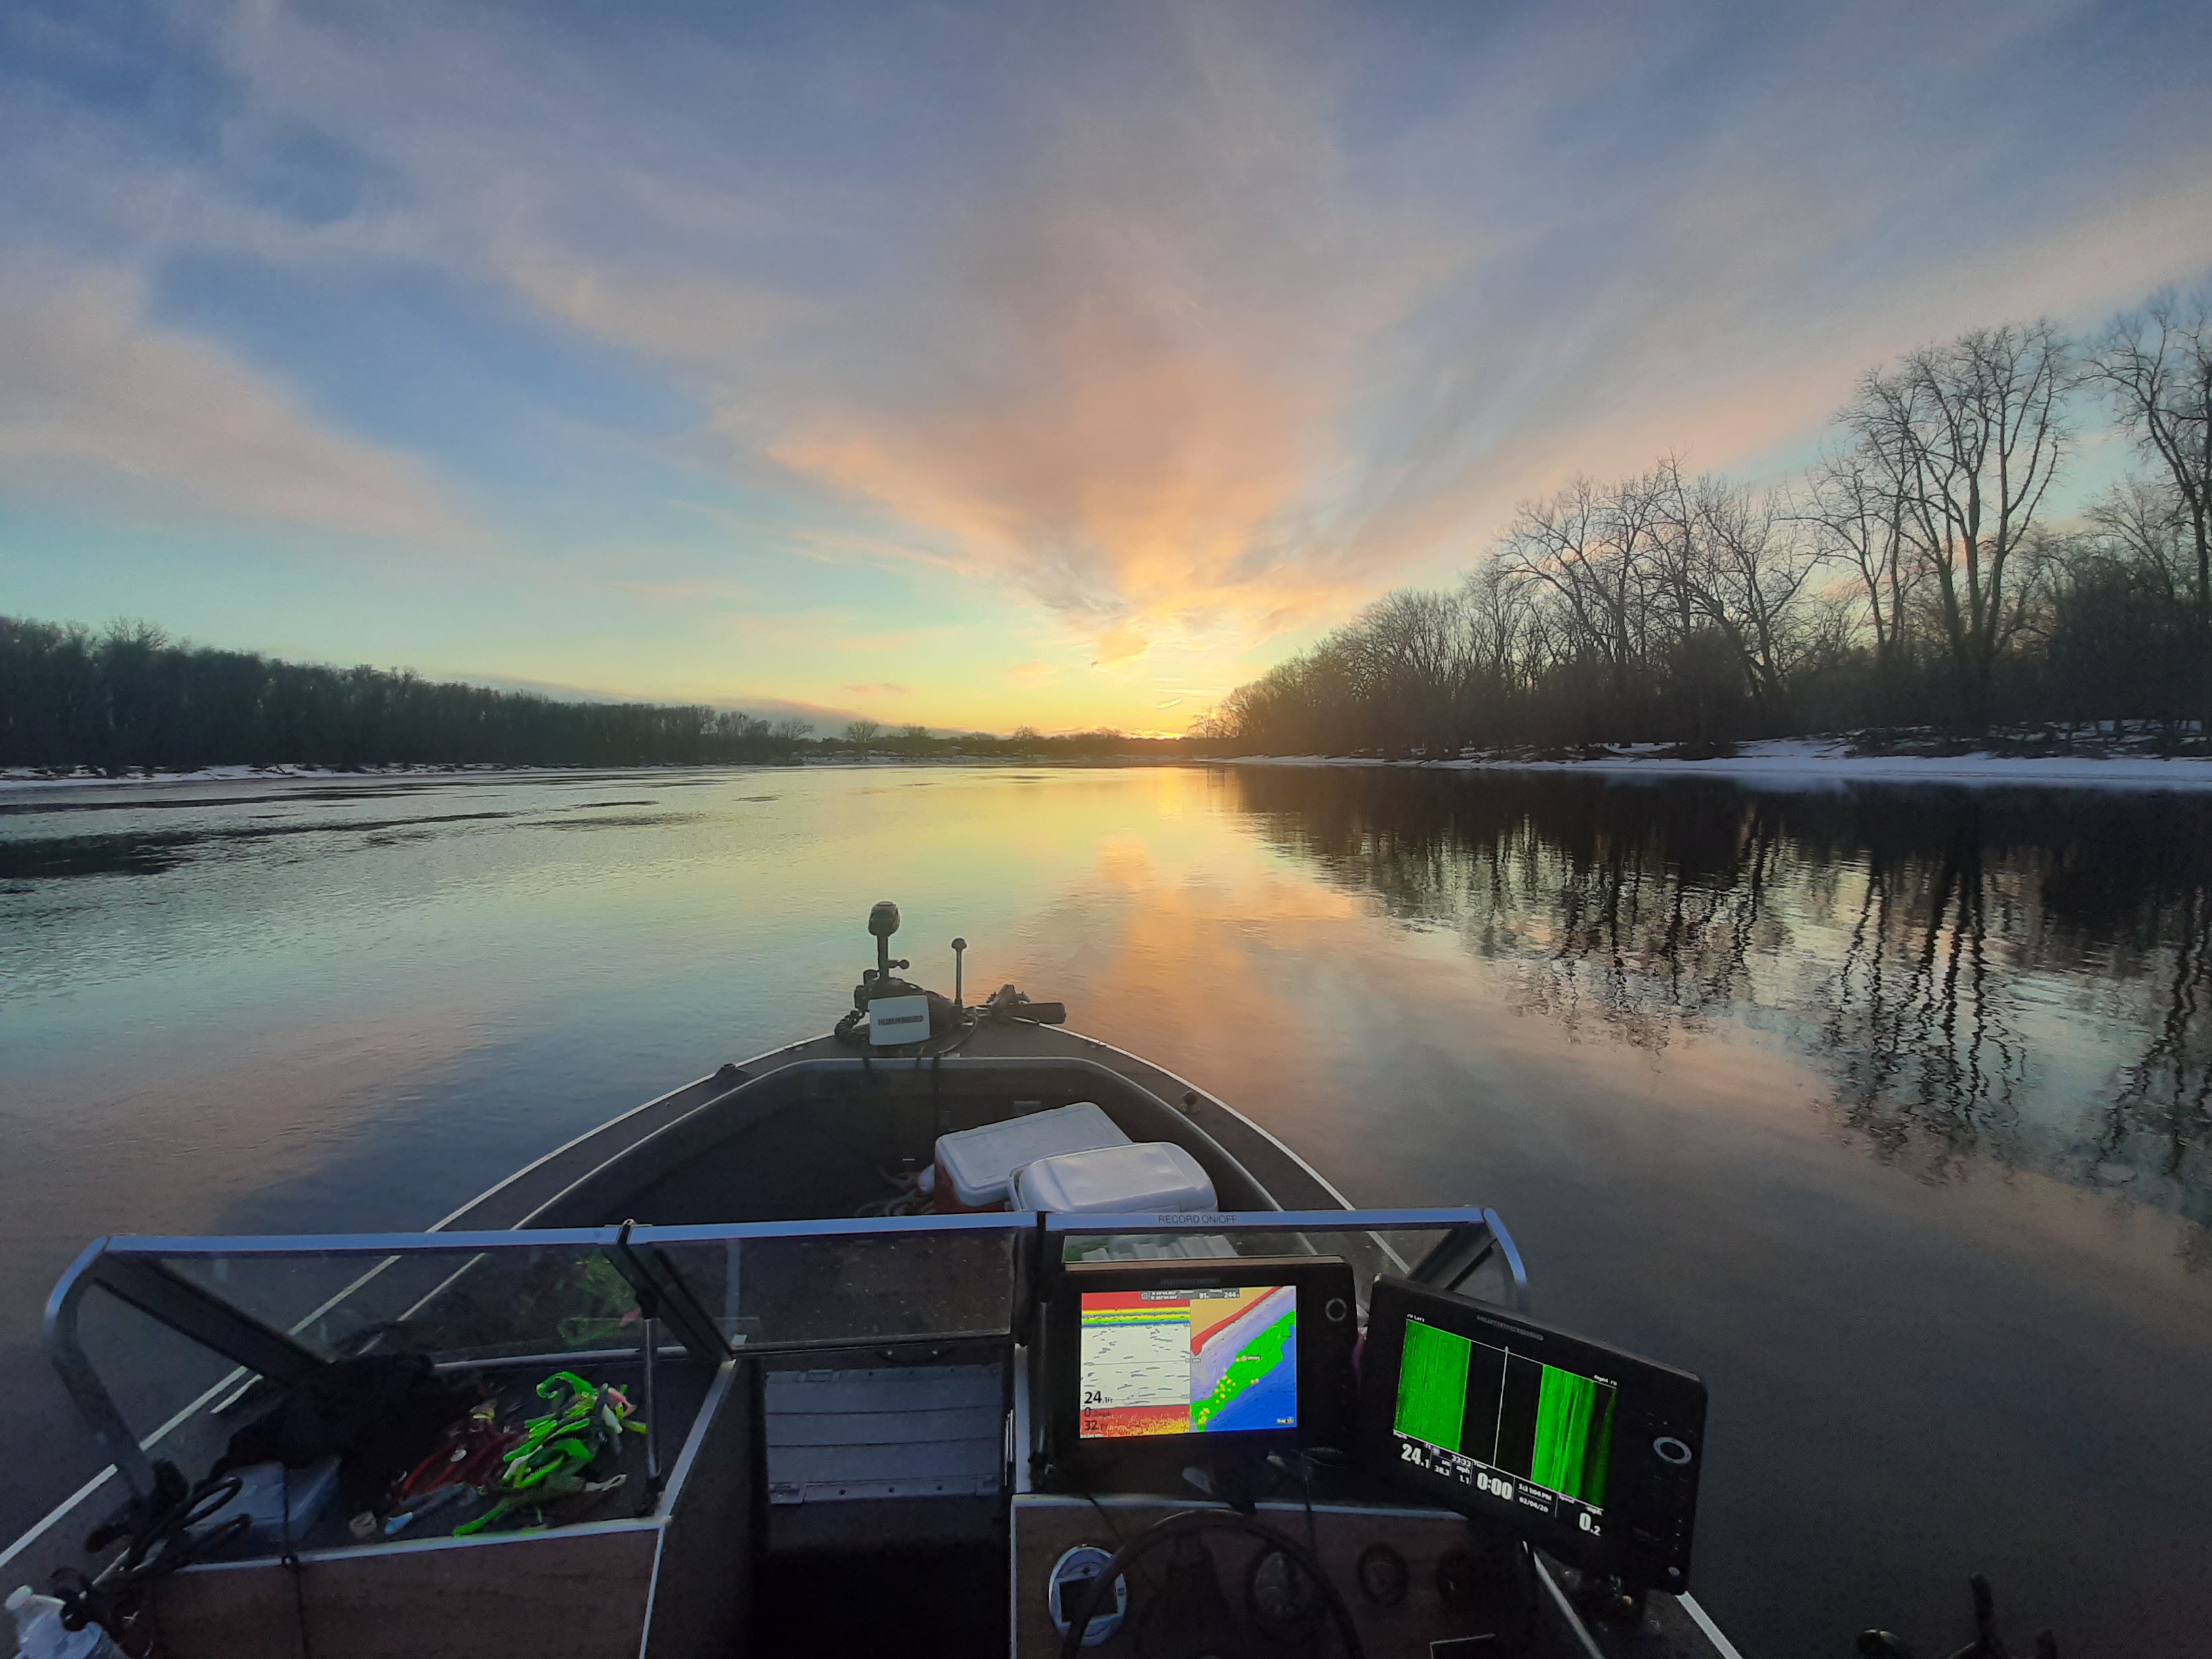 Bow mounted light for night cruising - General Discussion Forum